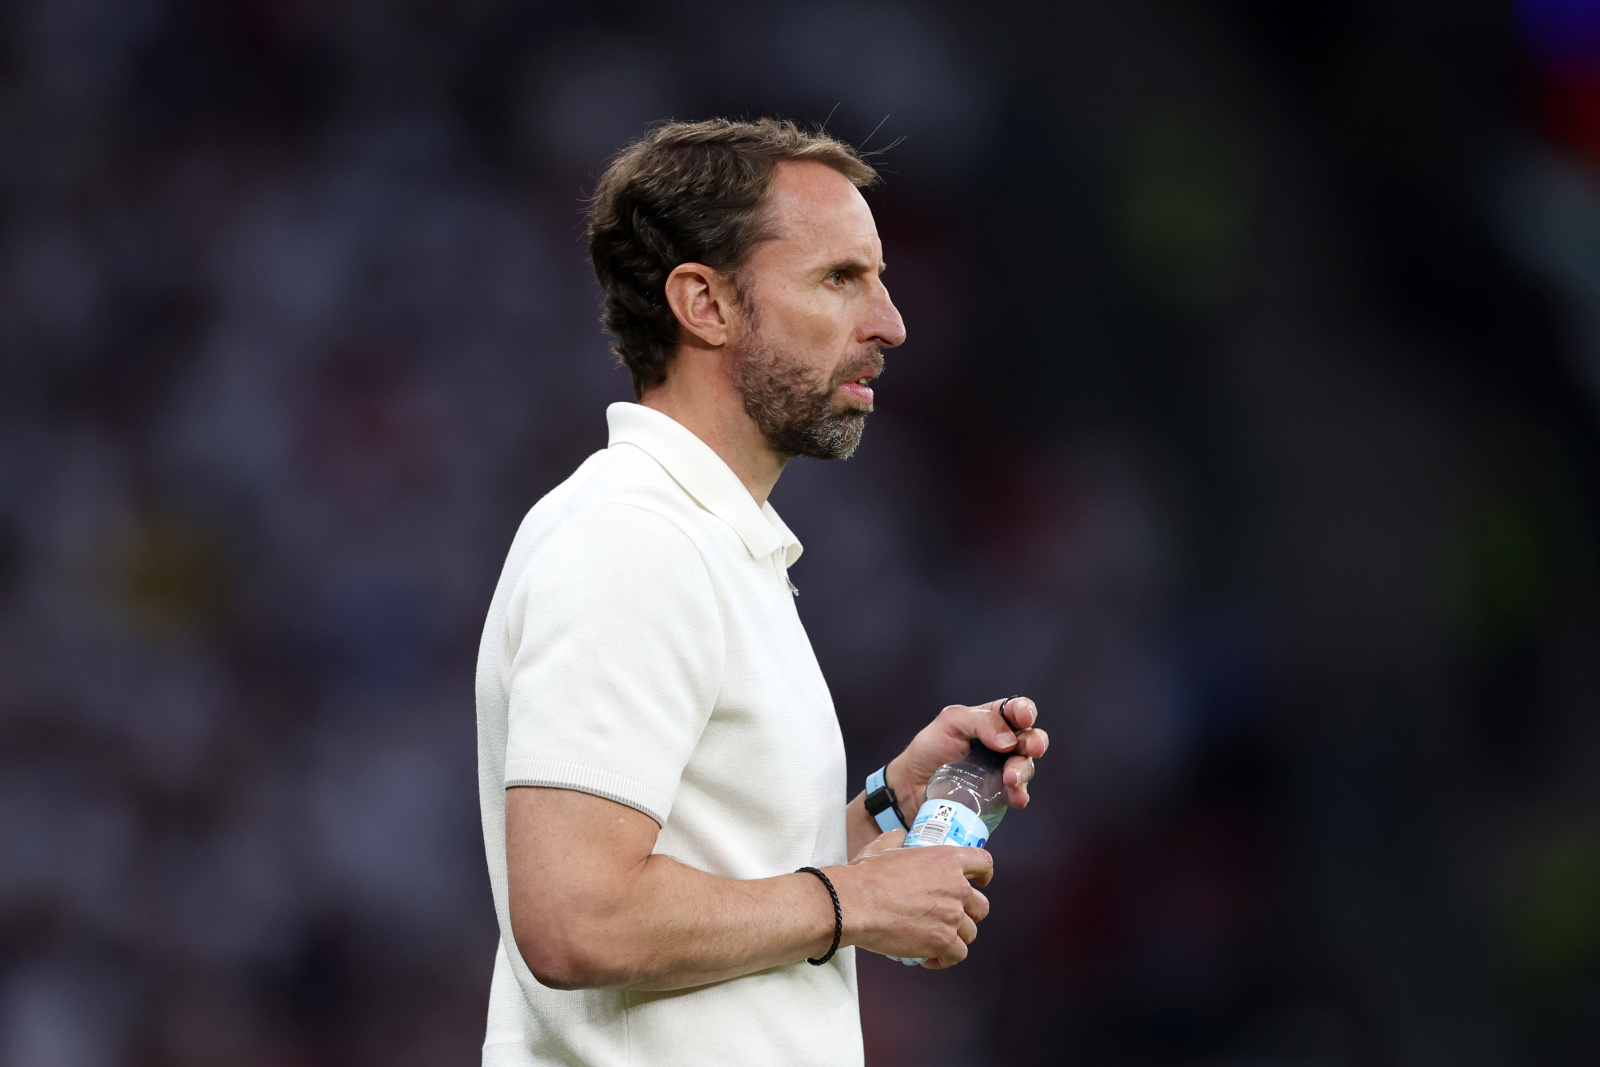 BERLIN, GERMANY - JULY 14: Gareth Southgate, Head Coach of England, takes a drink of water during the UEFA EURO 2024 final match between Spain and England at Olympiastadion on July 14, 2024 in Berlin, Germany. (Photo by Alex Pantling - UEFA/UEFA via Getty Images)